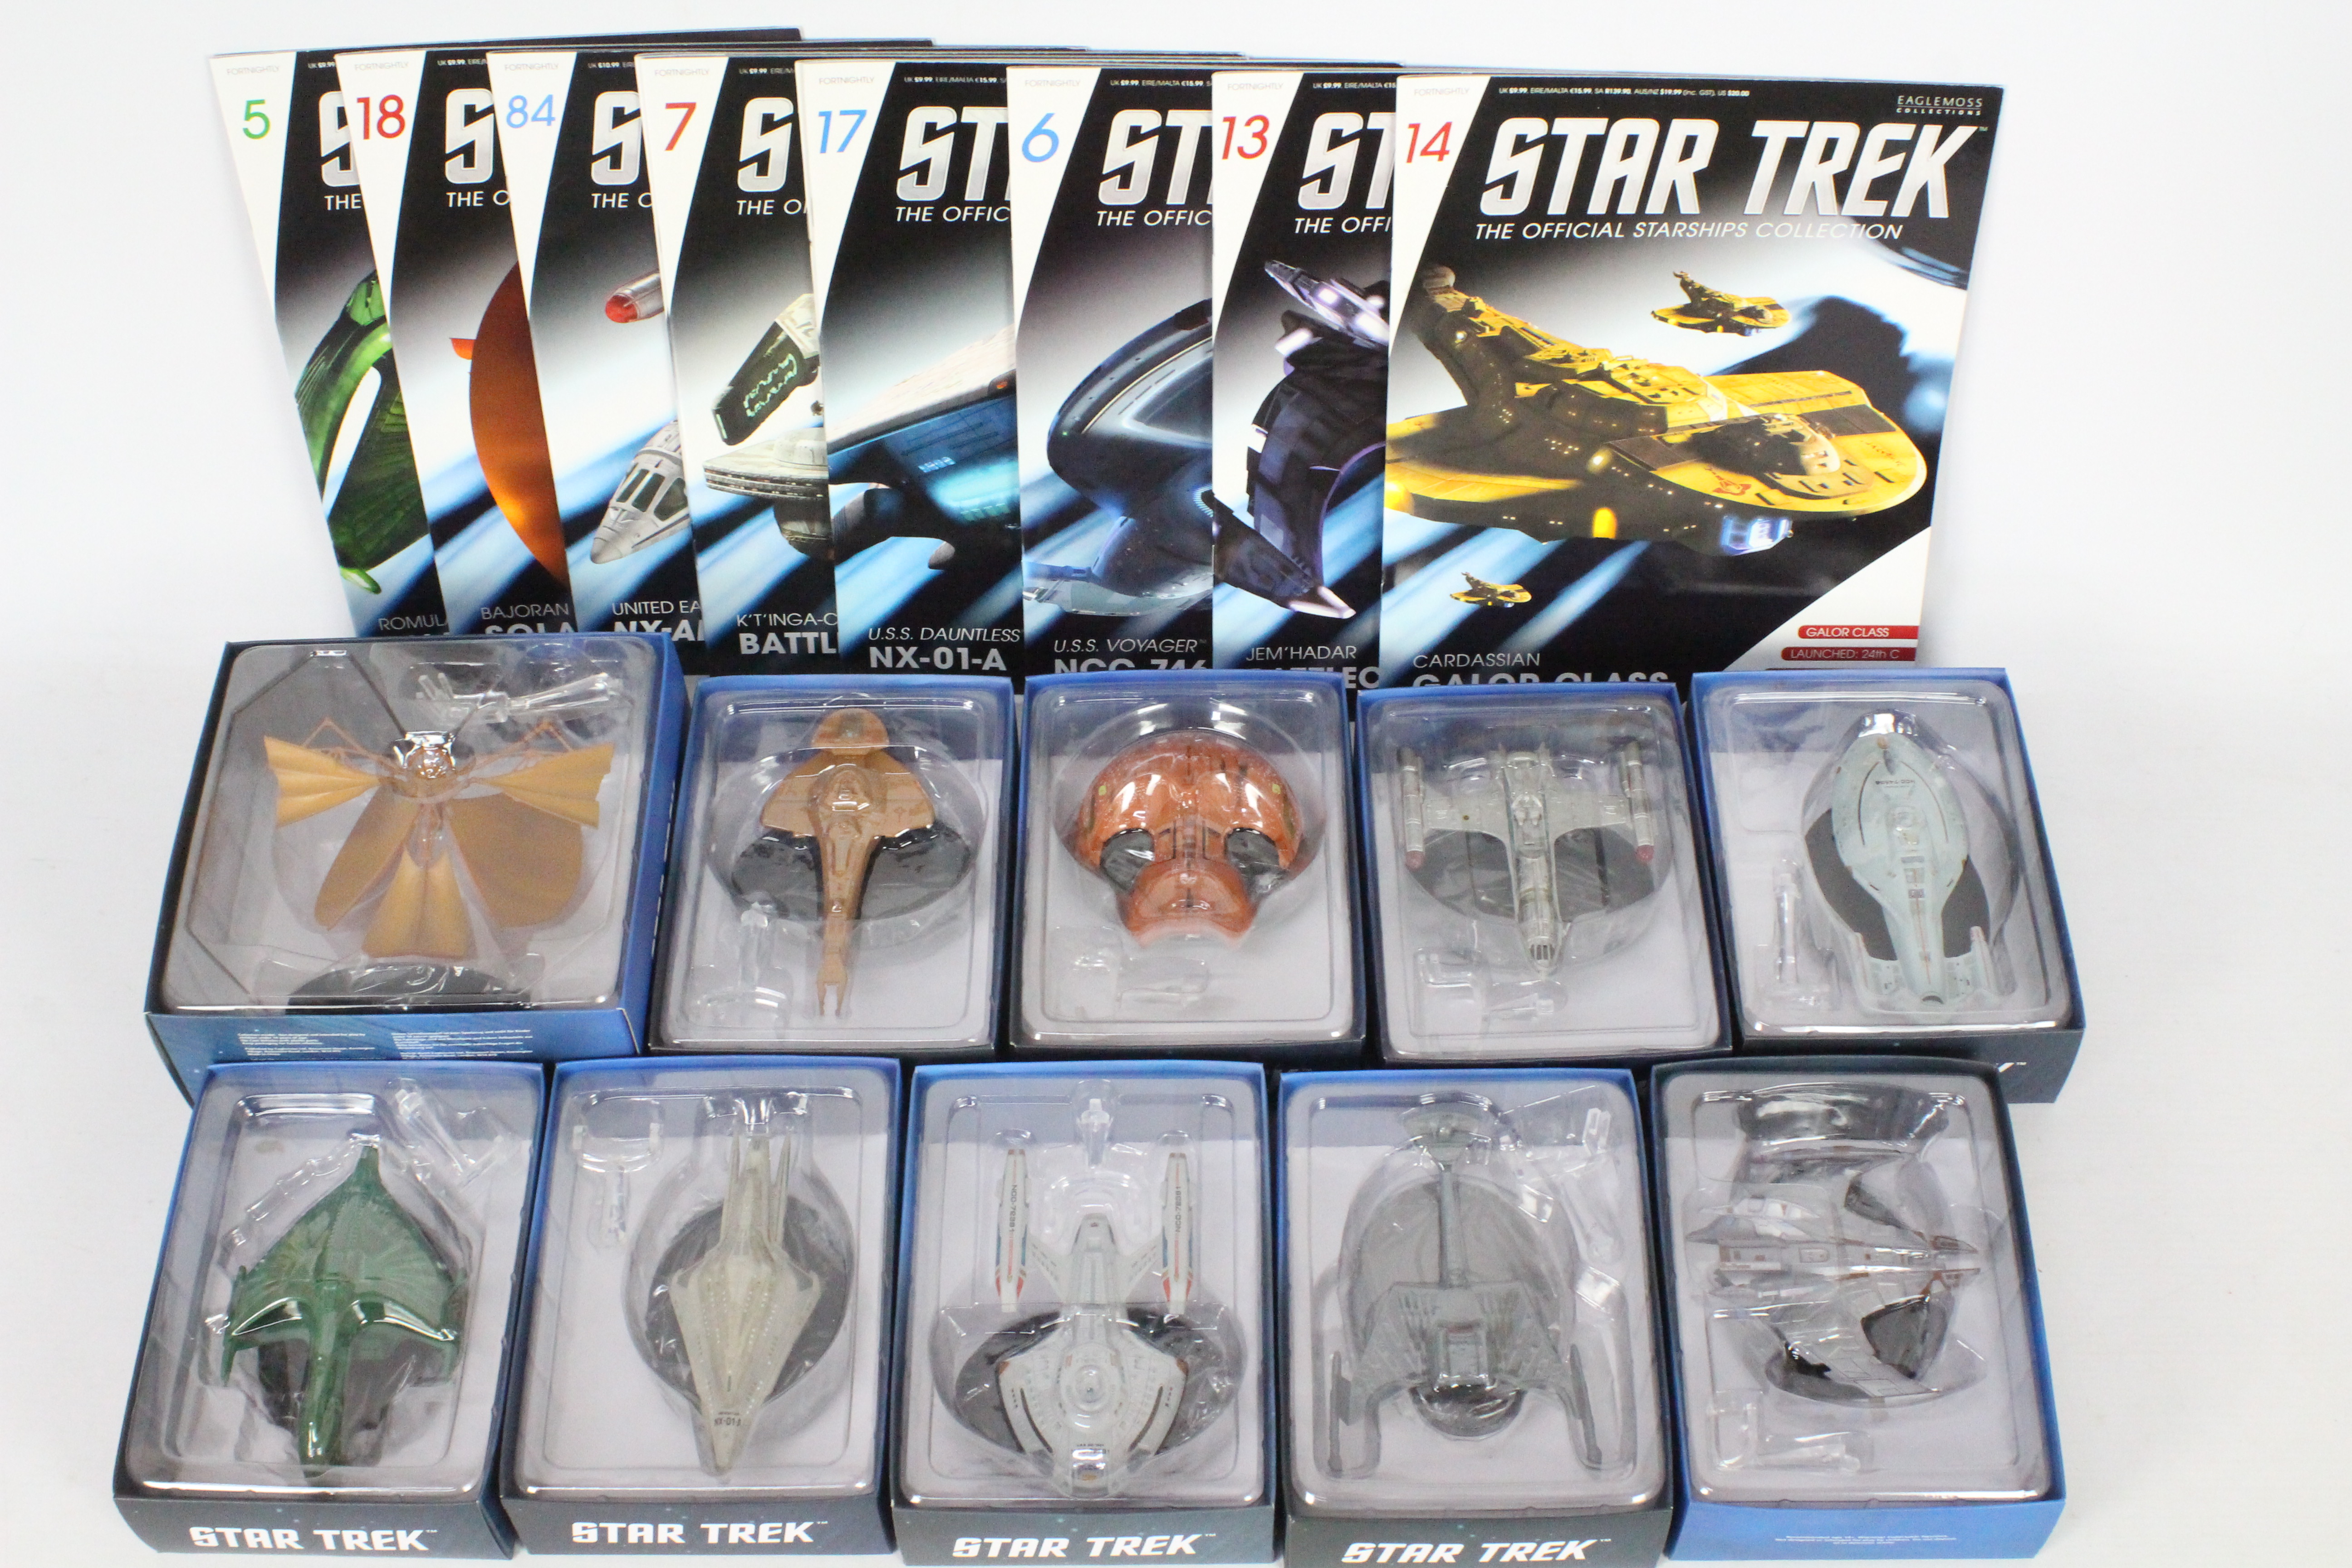 Eaglemoss - A starfleet of 10 diecast 'Star Trek' space ships and accompanying magazines from the